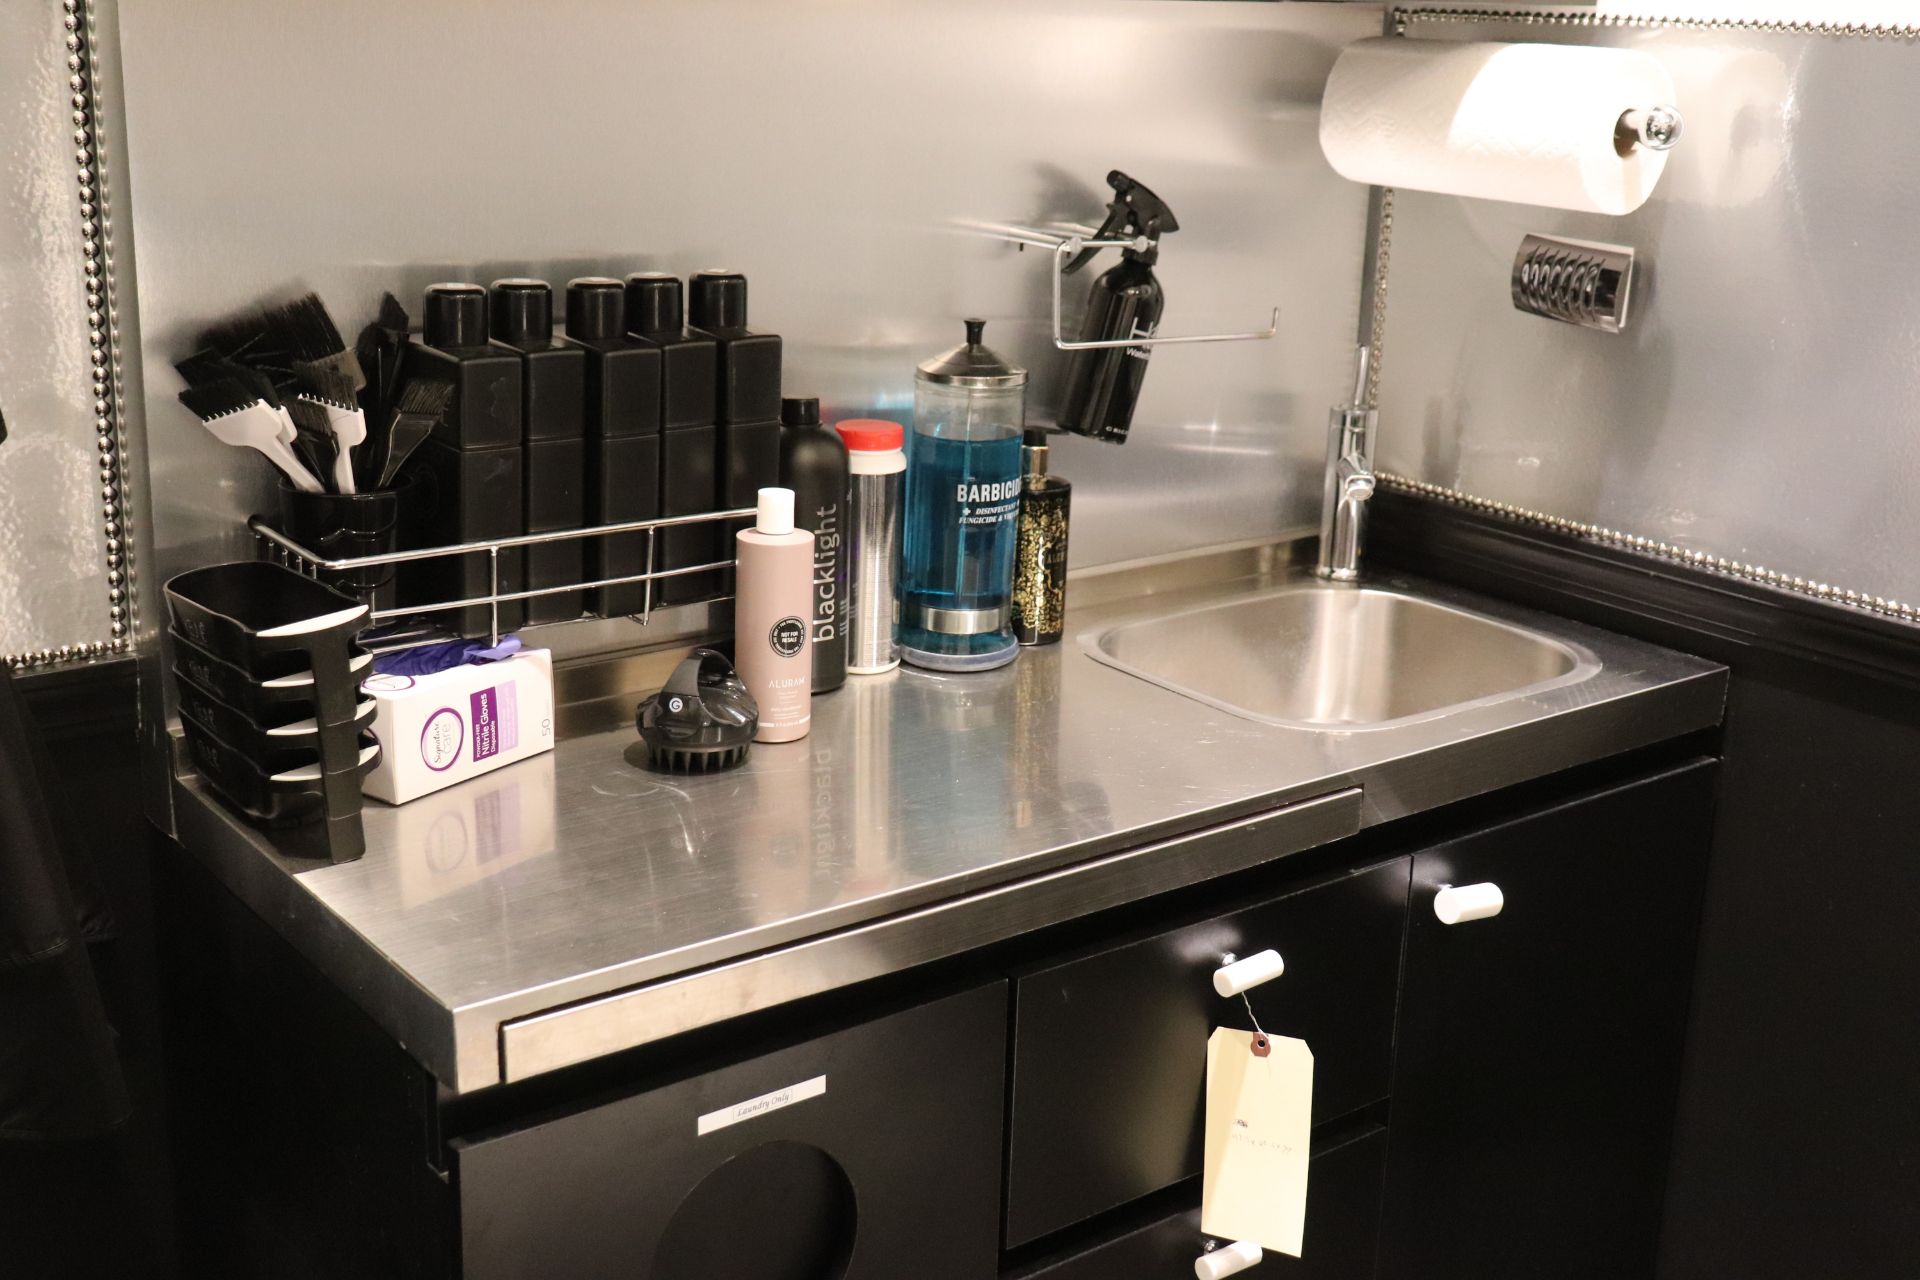 Hair Color Station with stainless steel sink, with faucet, backsplash and cabinet - Image 2 of 3